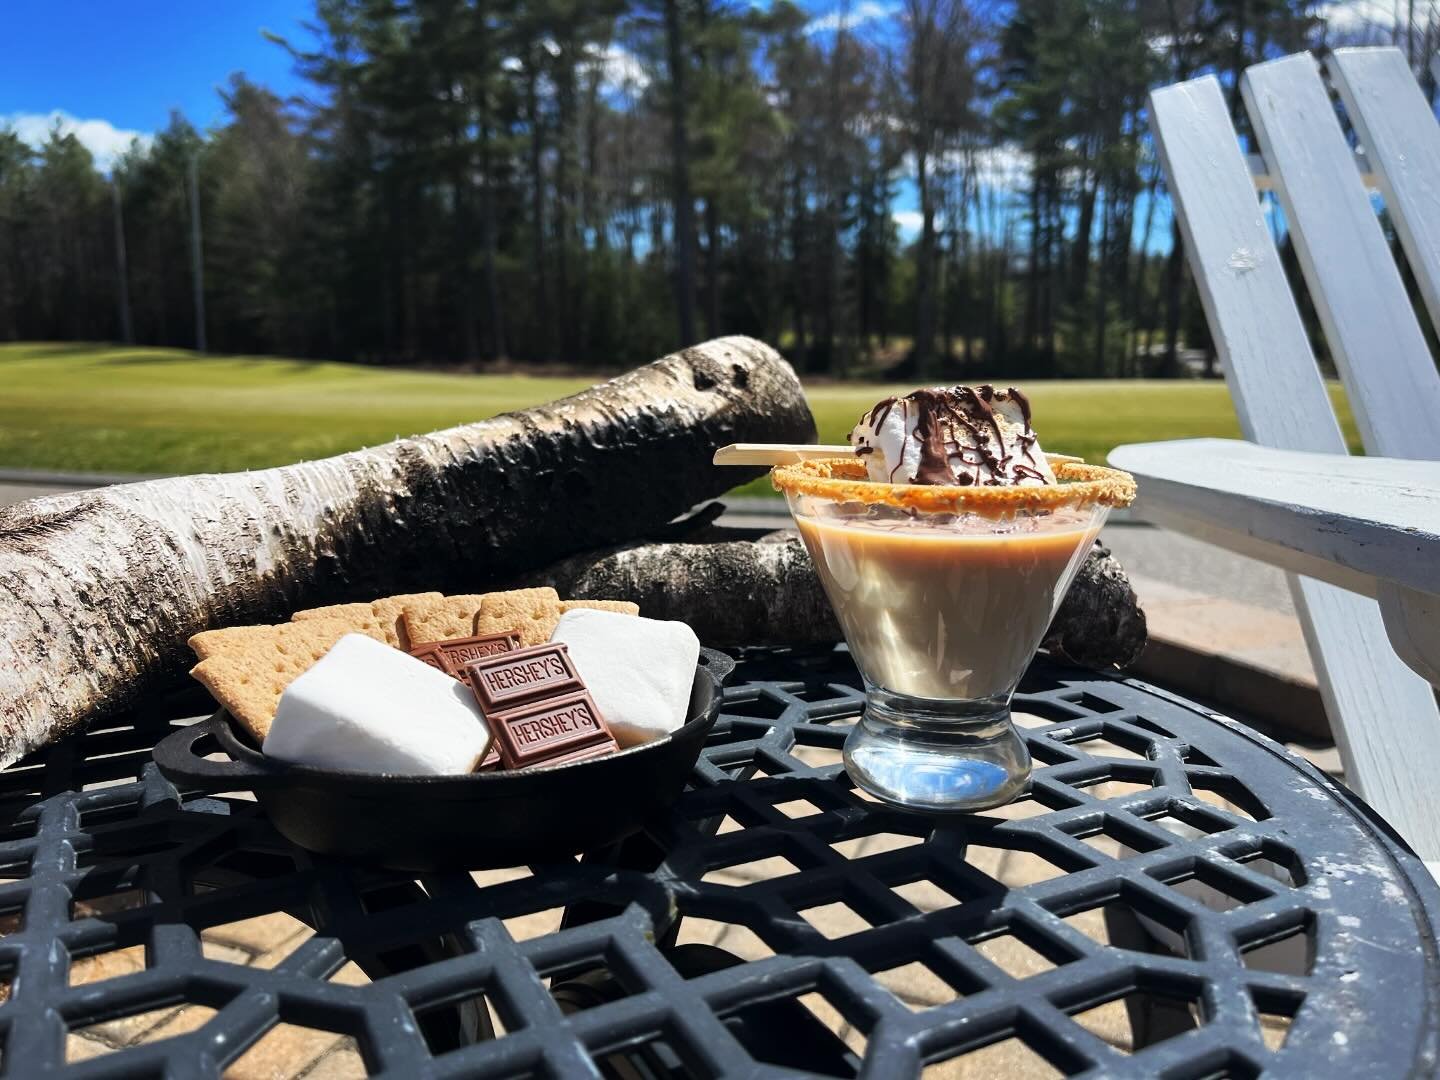 It&rsquo;s almost Firepit Friday at THE Old Marsh CC! Come enjoy what looks to be a beautiful night with friends around one of our @solostove fire pits with a signature s&rsquo;mores martini and a delectable s&rsquo;mores platter! As always, public i